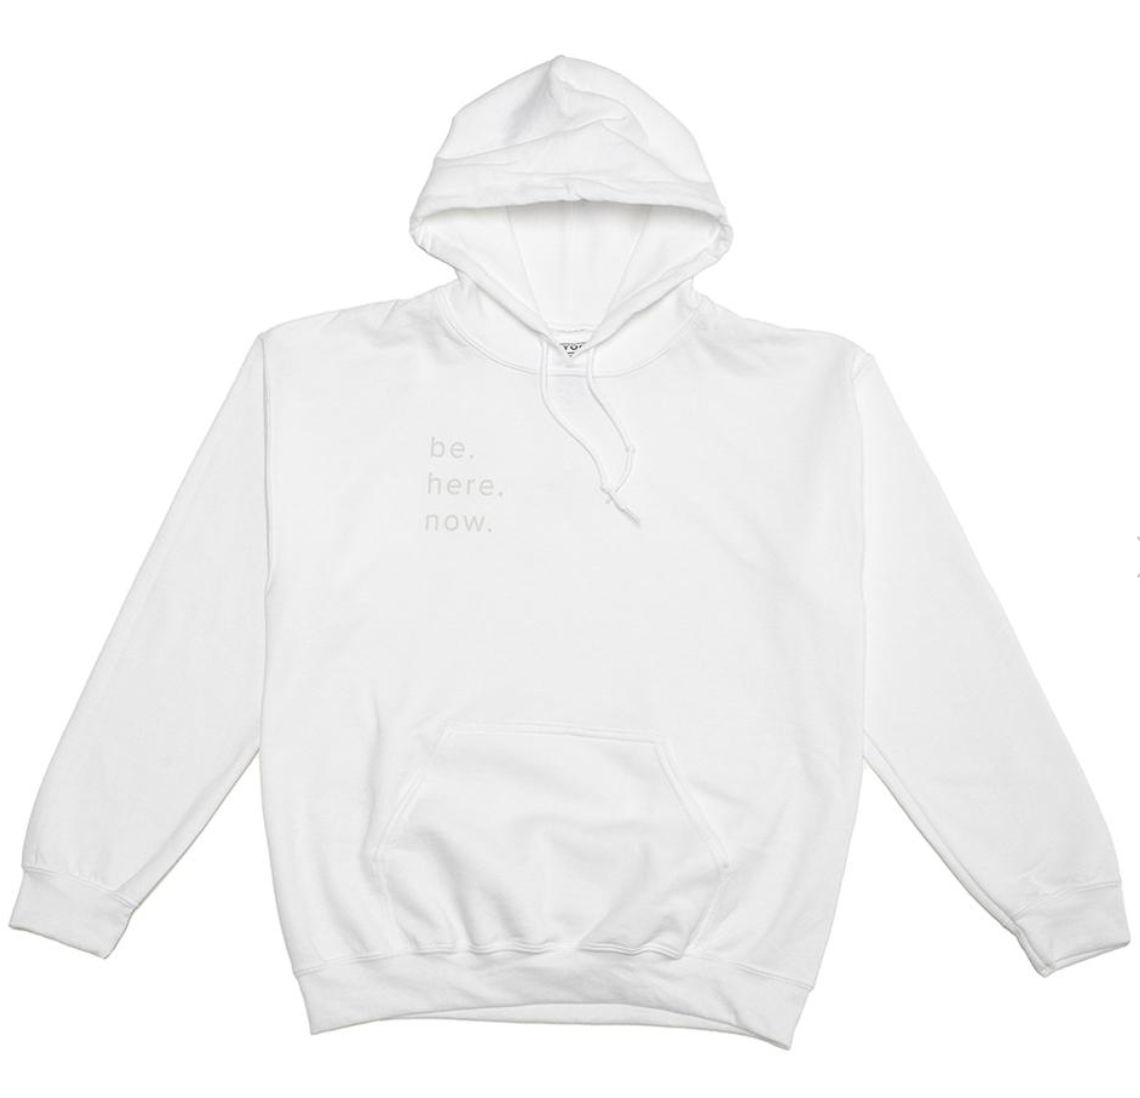 Mindful Collective Co Small be. here. now. sweater